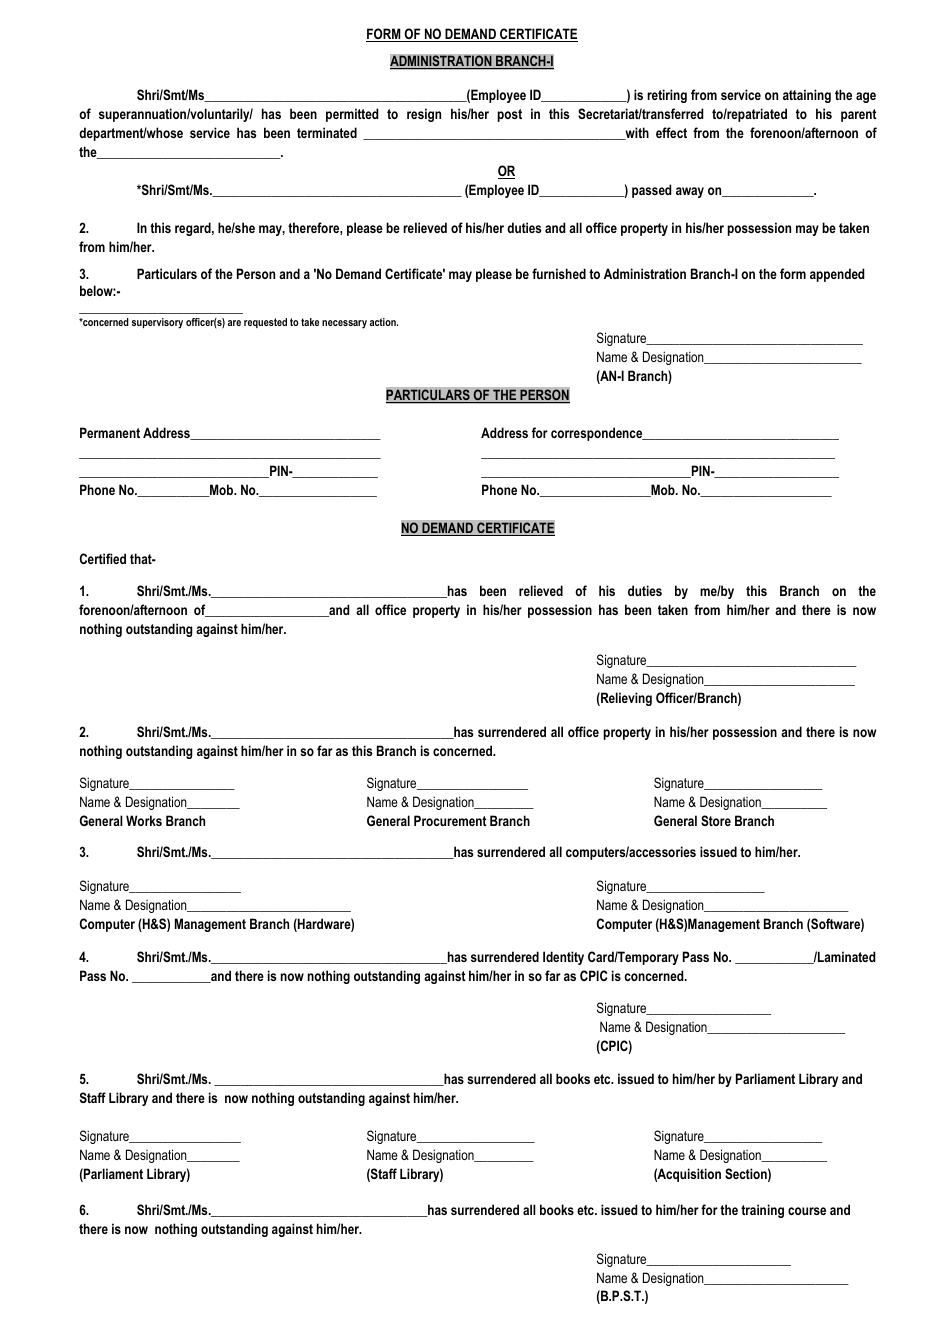 Form of No Demand Certificate - India, Page 1